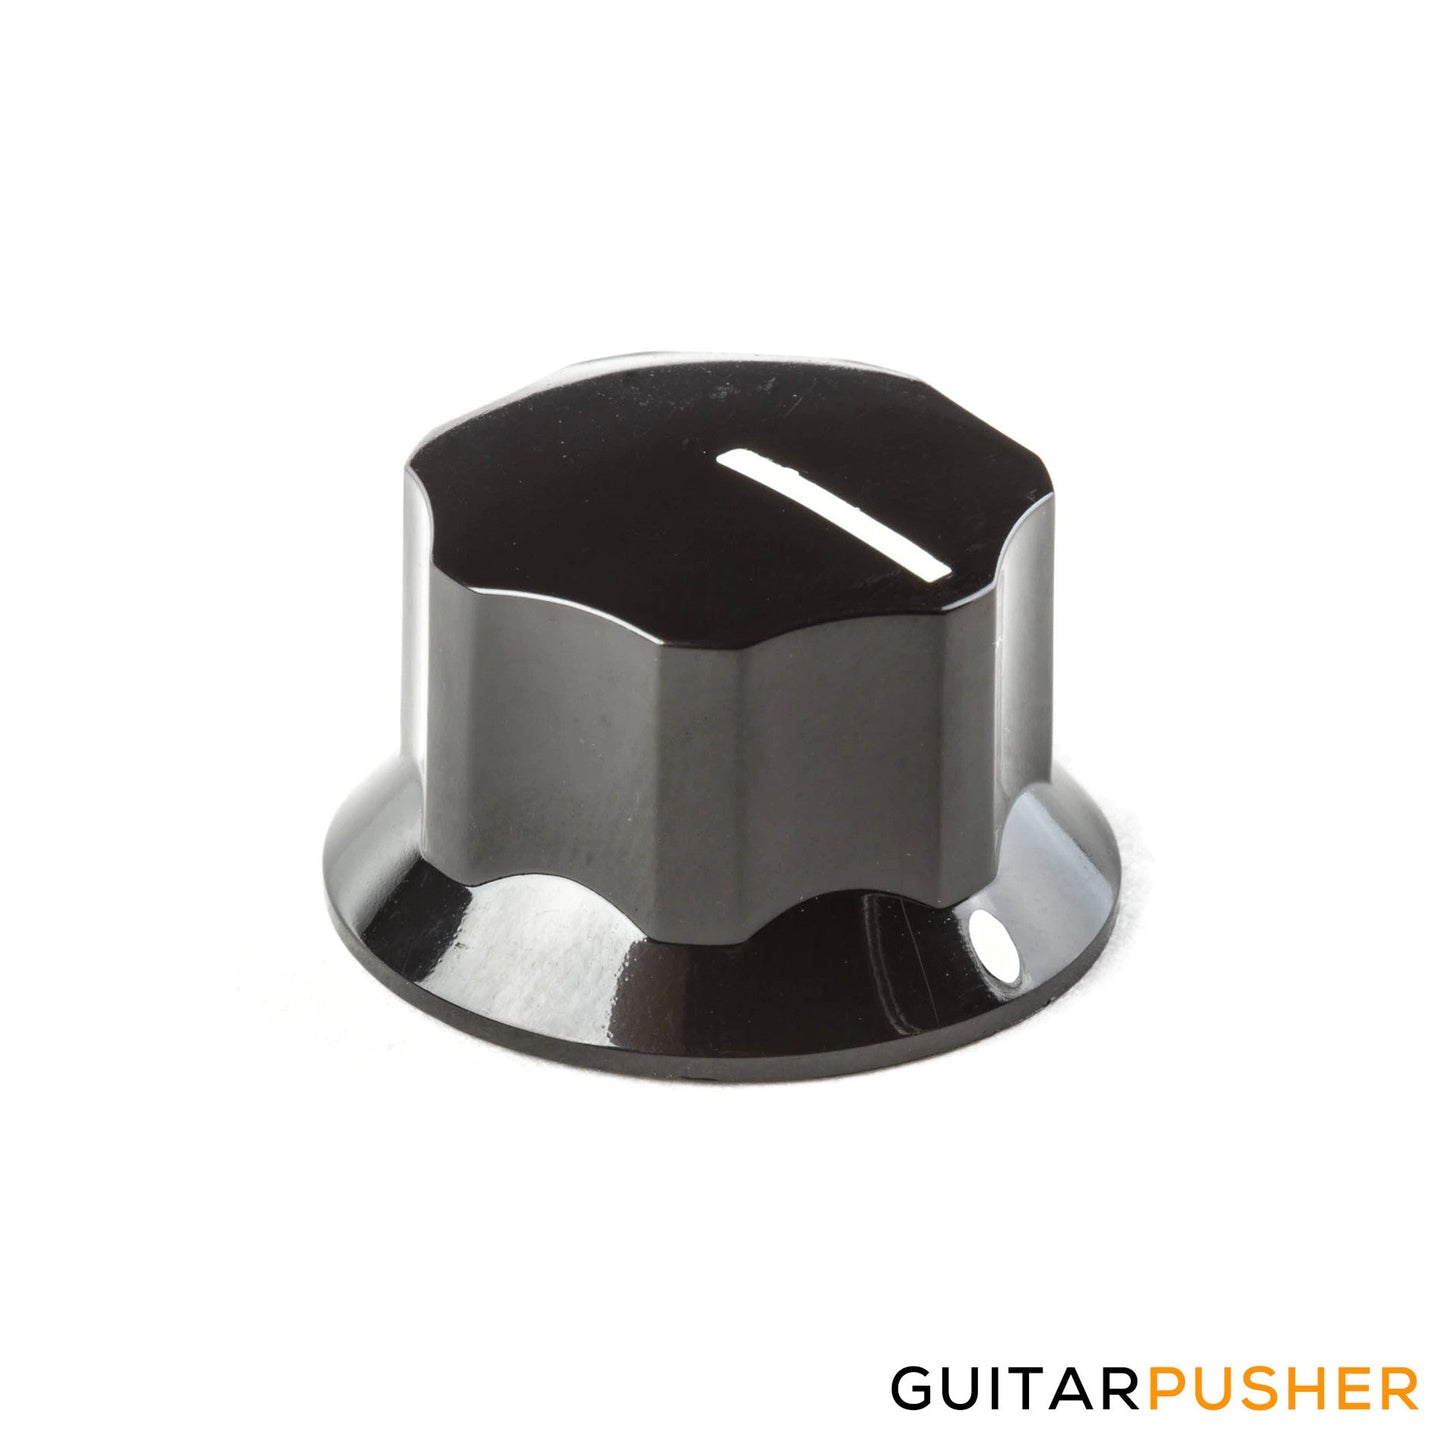 MXR P-ECB-130 Replacement Skirted Pedal Knob